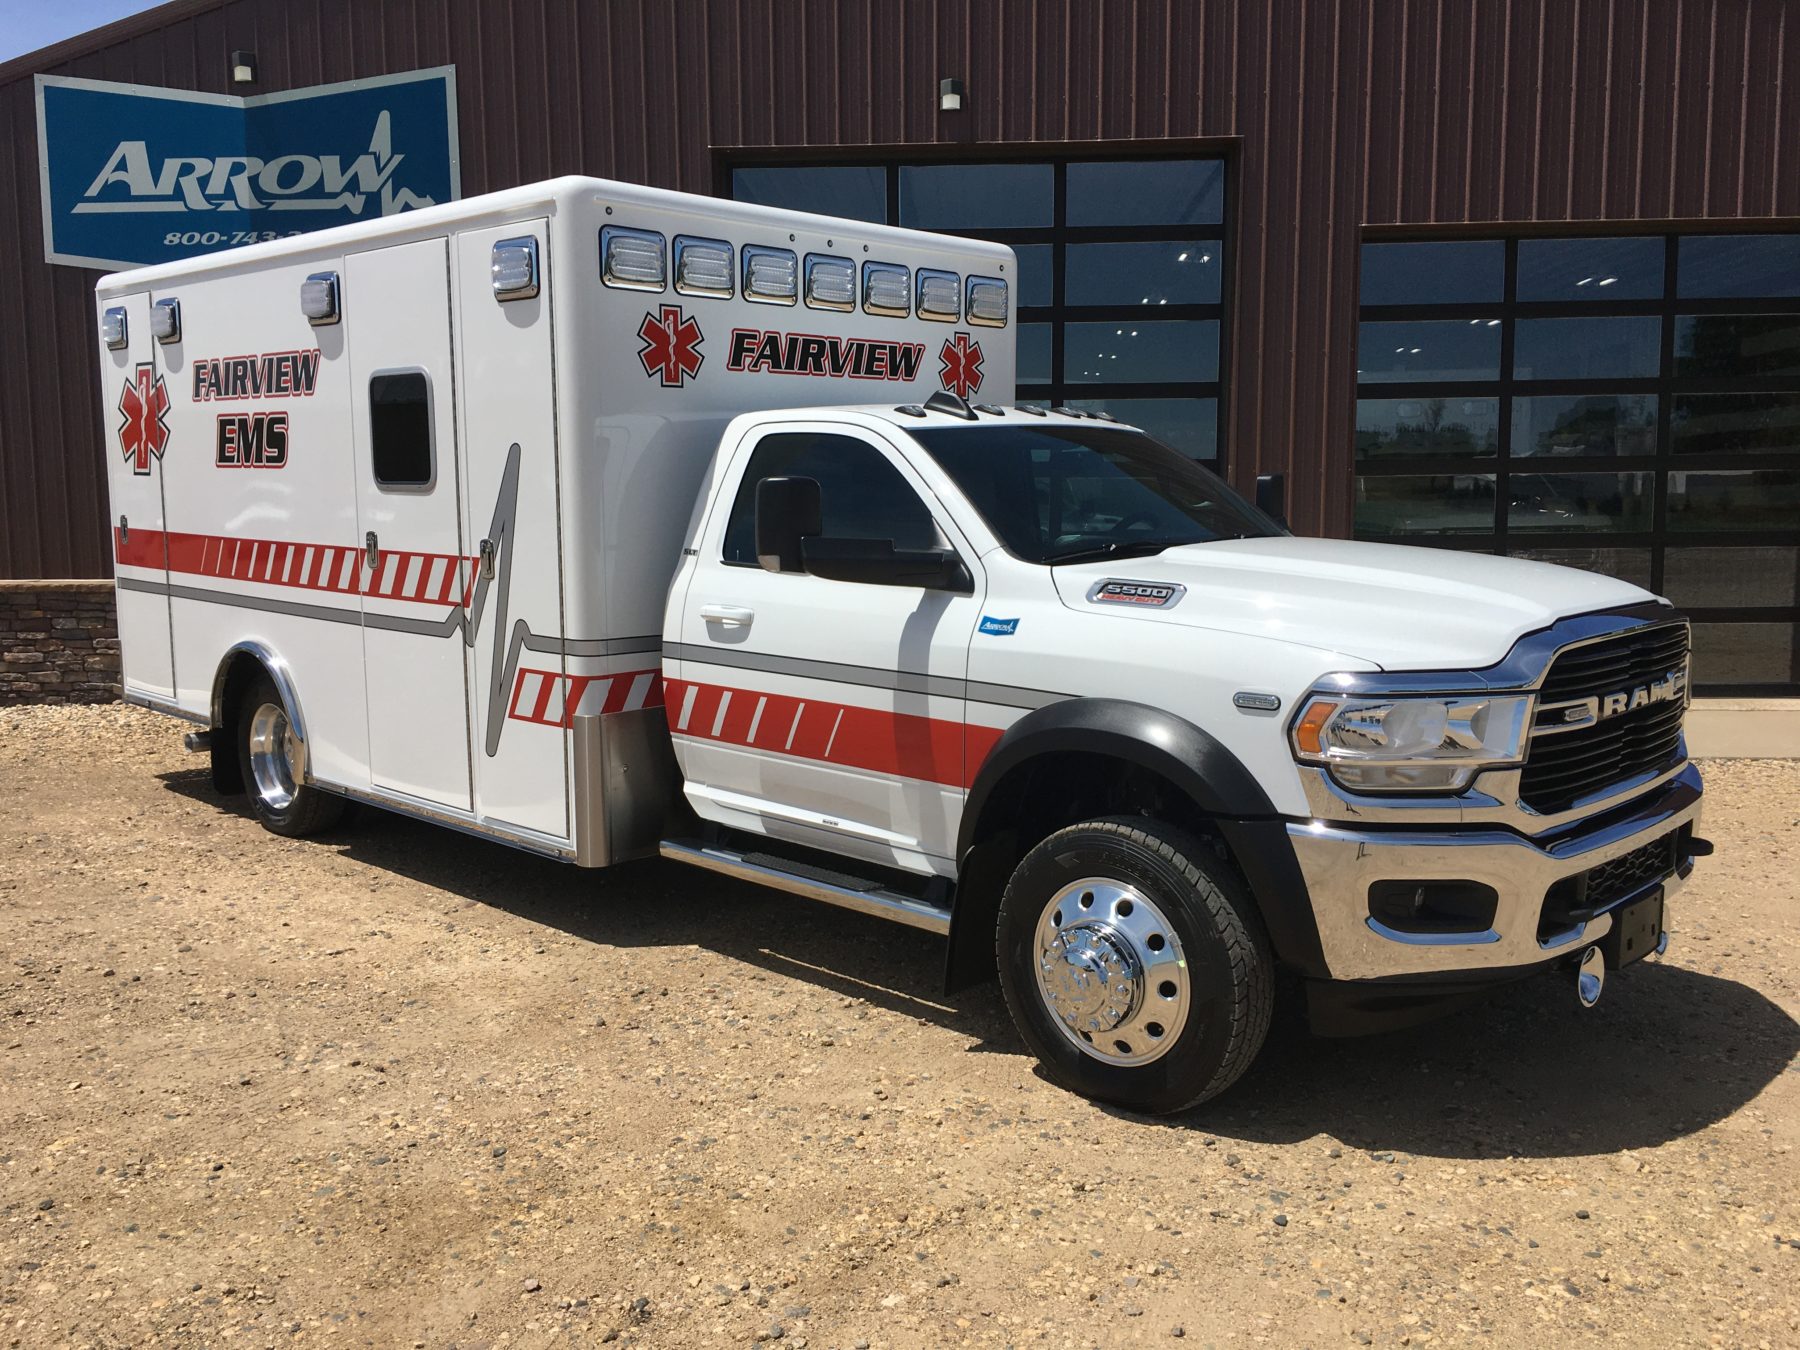 2021 Ram 5500 4x4 Heavy Duty Ambulance For Sale – Picture 4